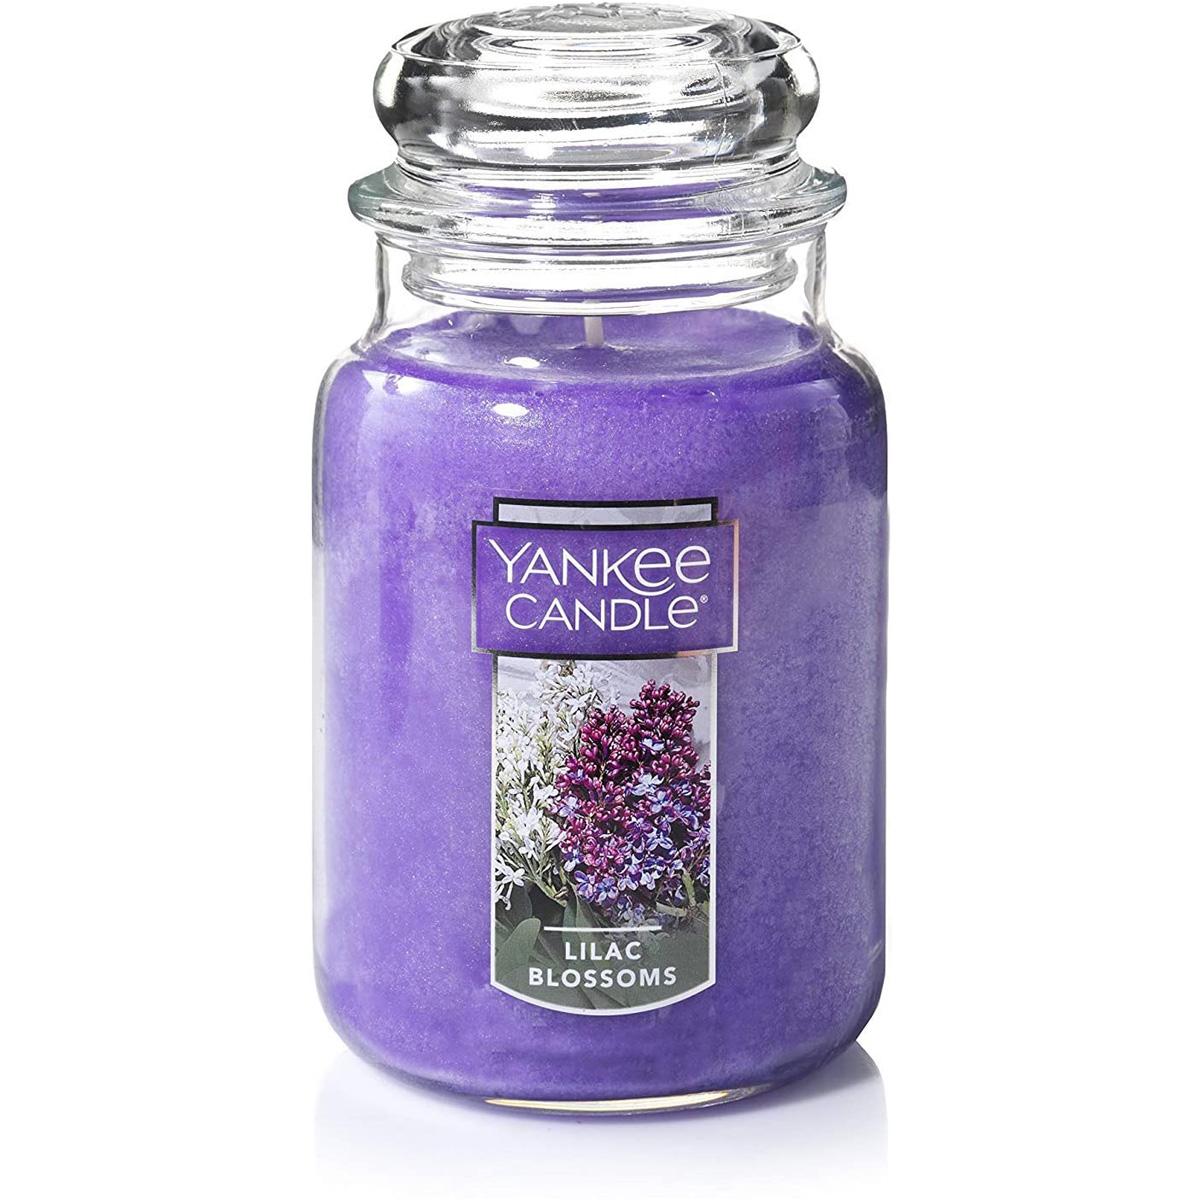 22oz Yankee Candle Large Jar Candle Lilac Blossoms for $11.93